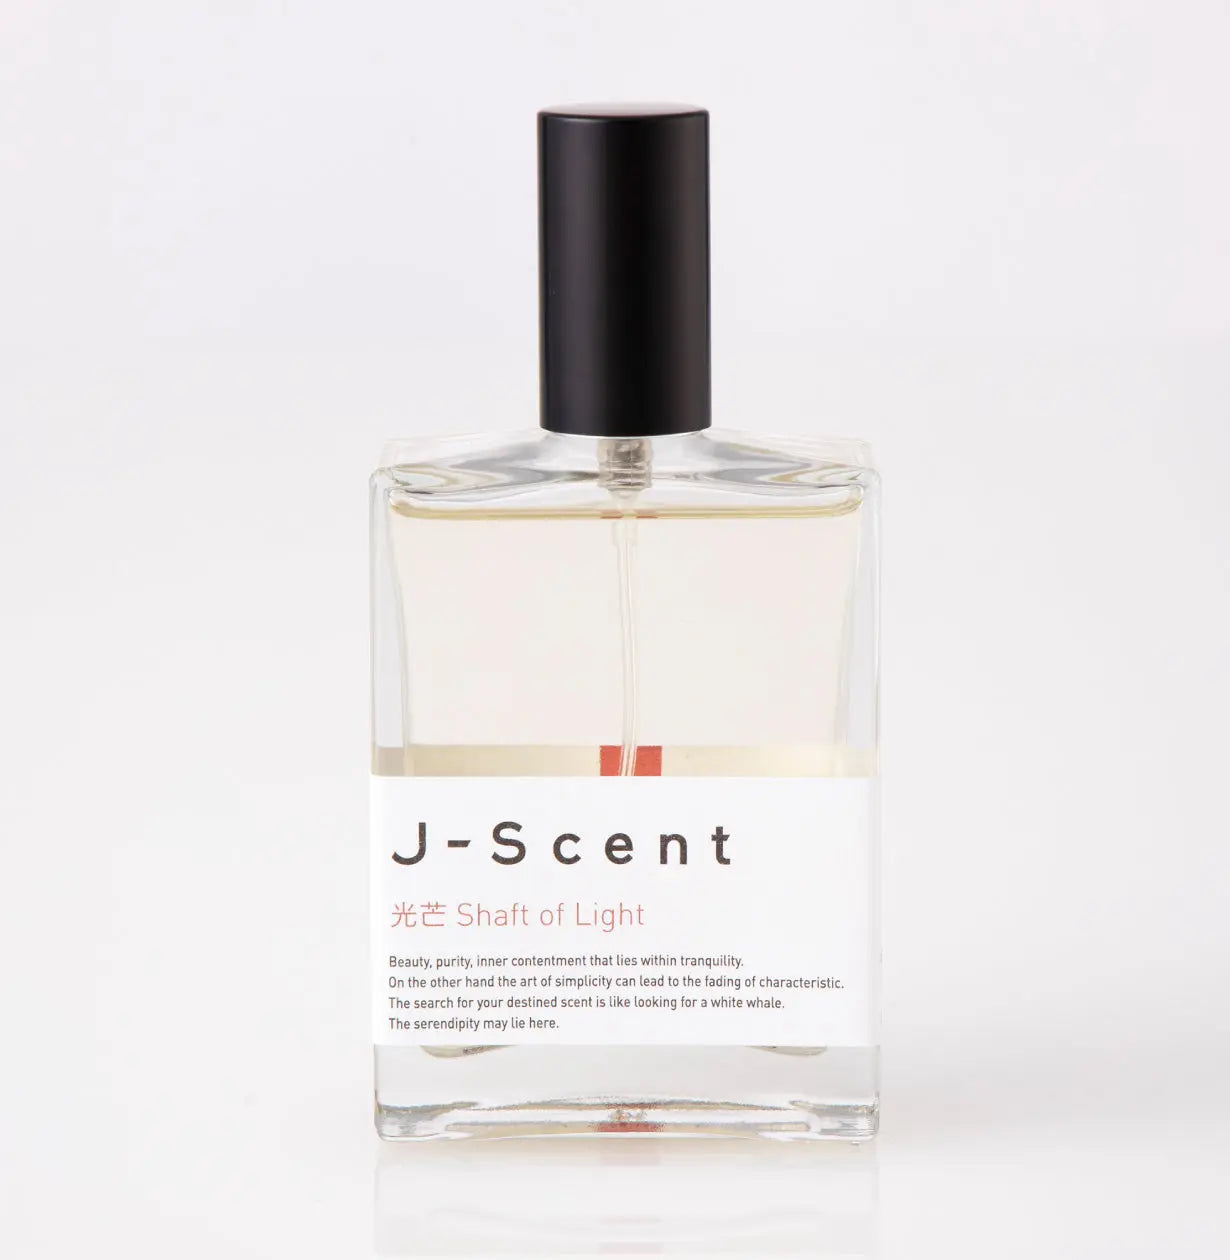 J-scent Вал Света - 50 мл